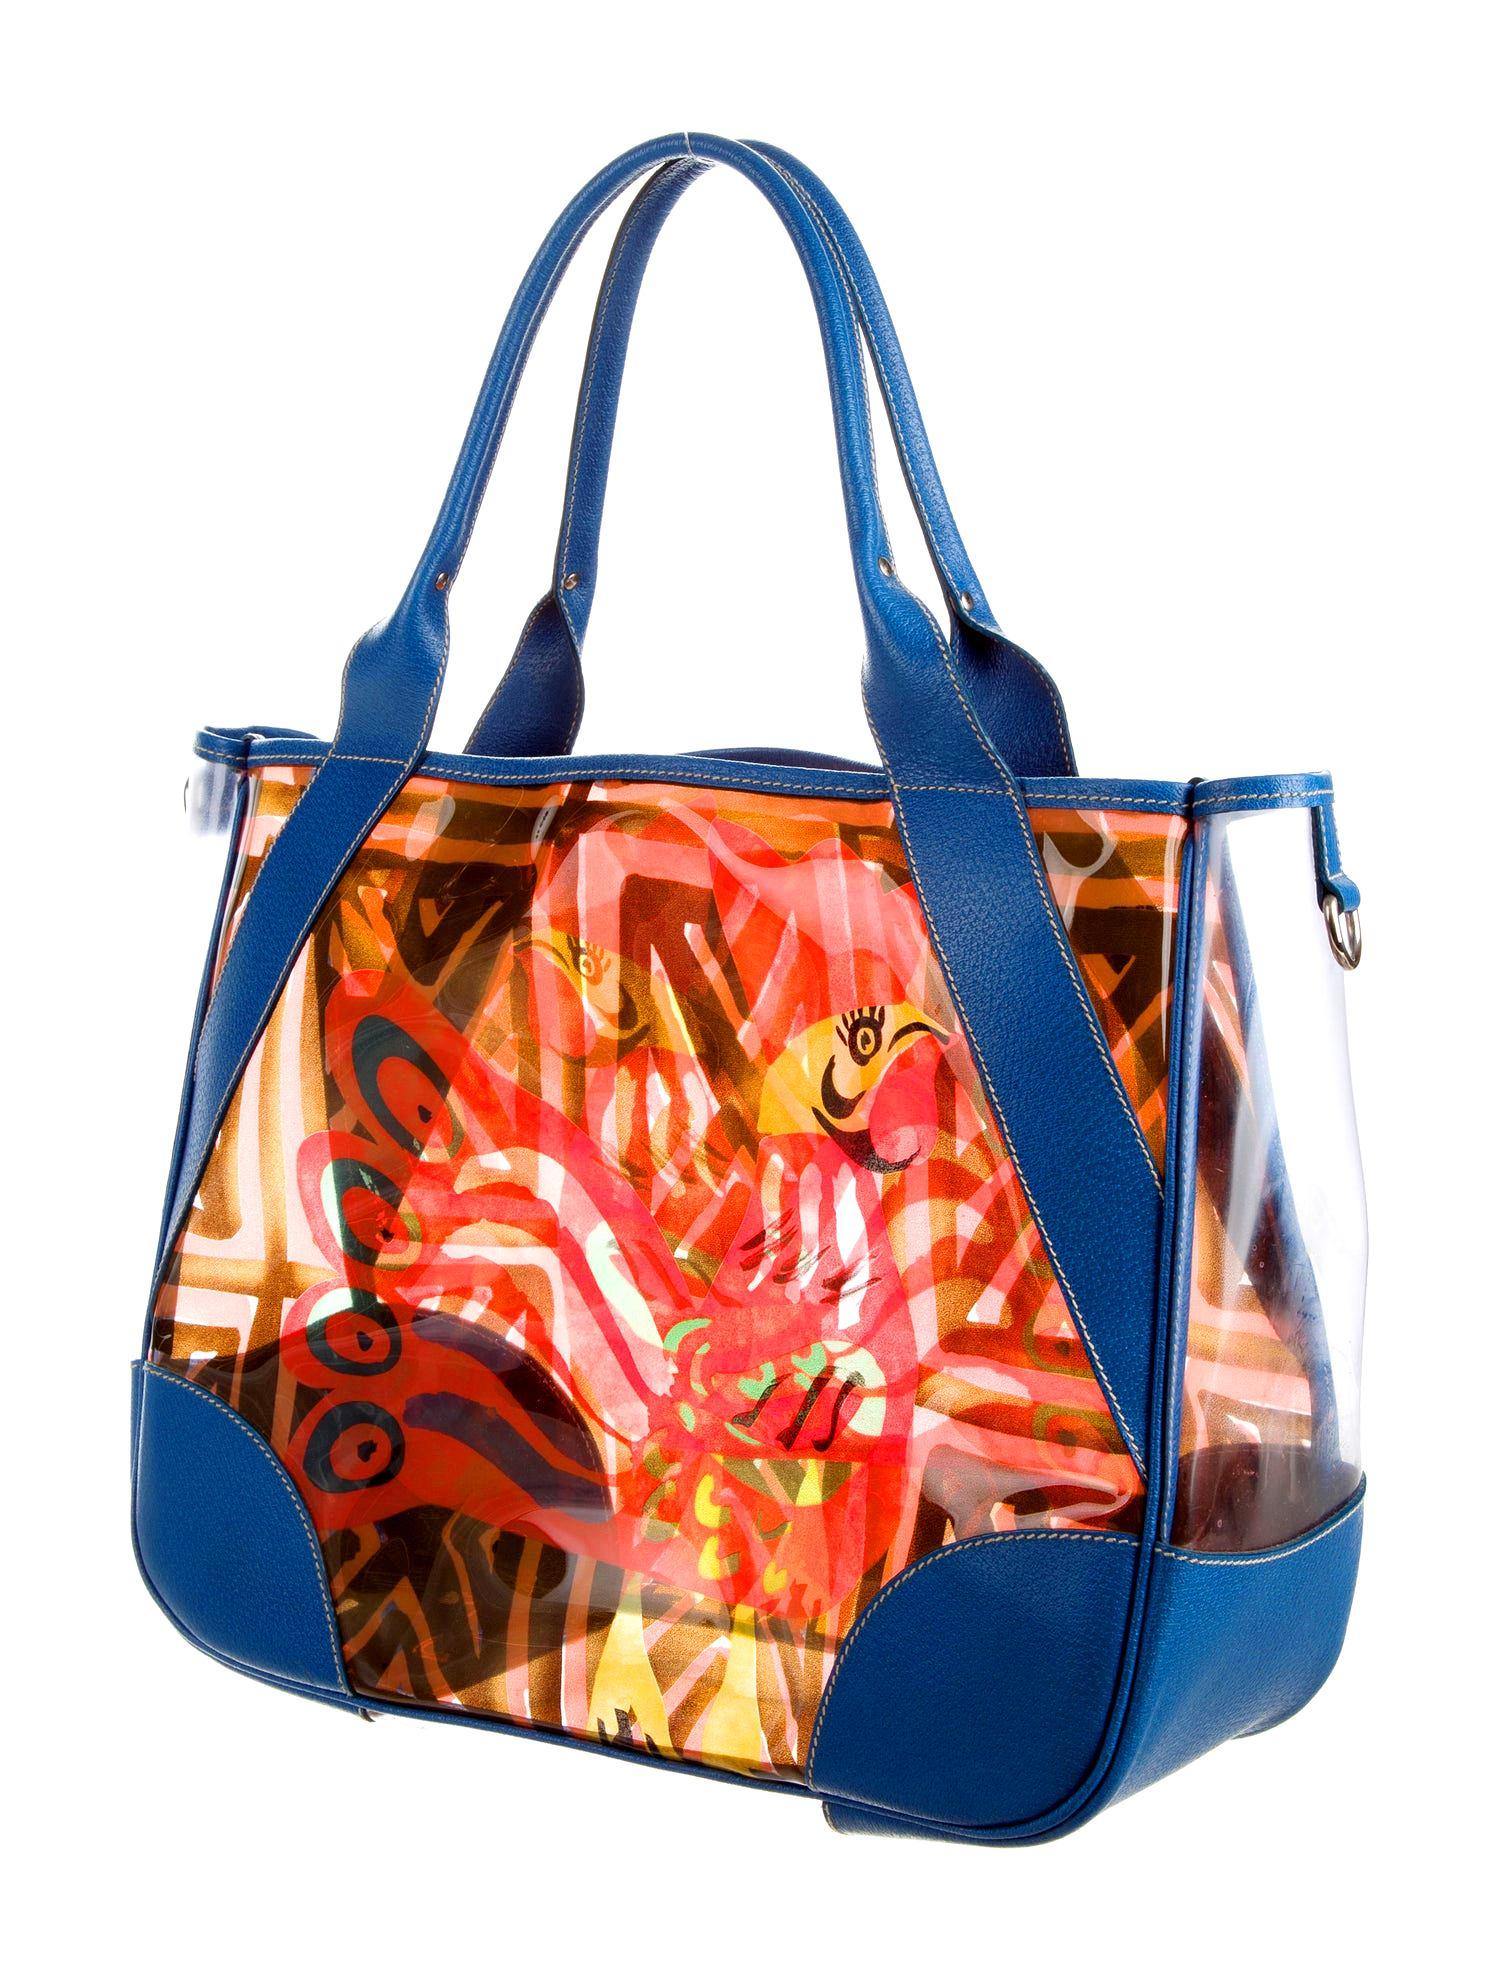 A playful Prada printed bag ready for your next beach or pool day
Be different - a rare and special bag not everyone is carrying!
Printed PVC / Vinyl - perfect, water-resistant and durable to carry wet beachwear but can also be used as a regular